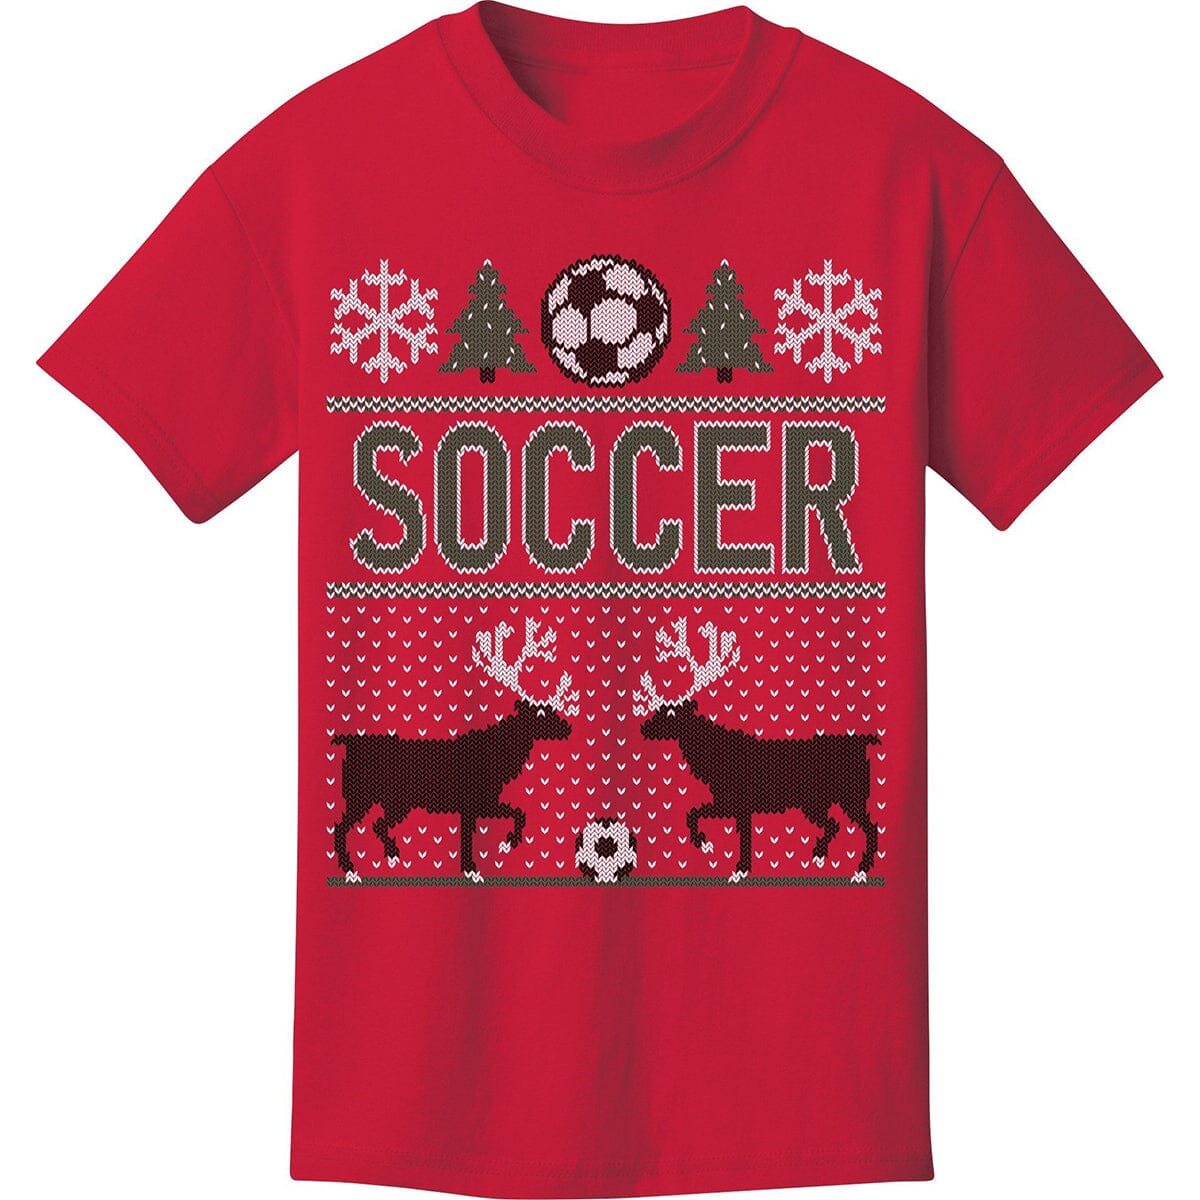 Ugly Sweater Soccer T-Shirt Humorous Shirt 411 Youth Small Red 